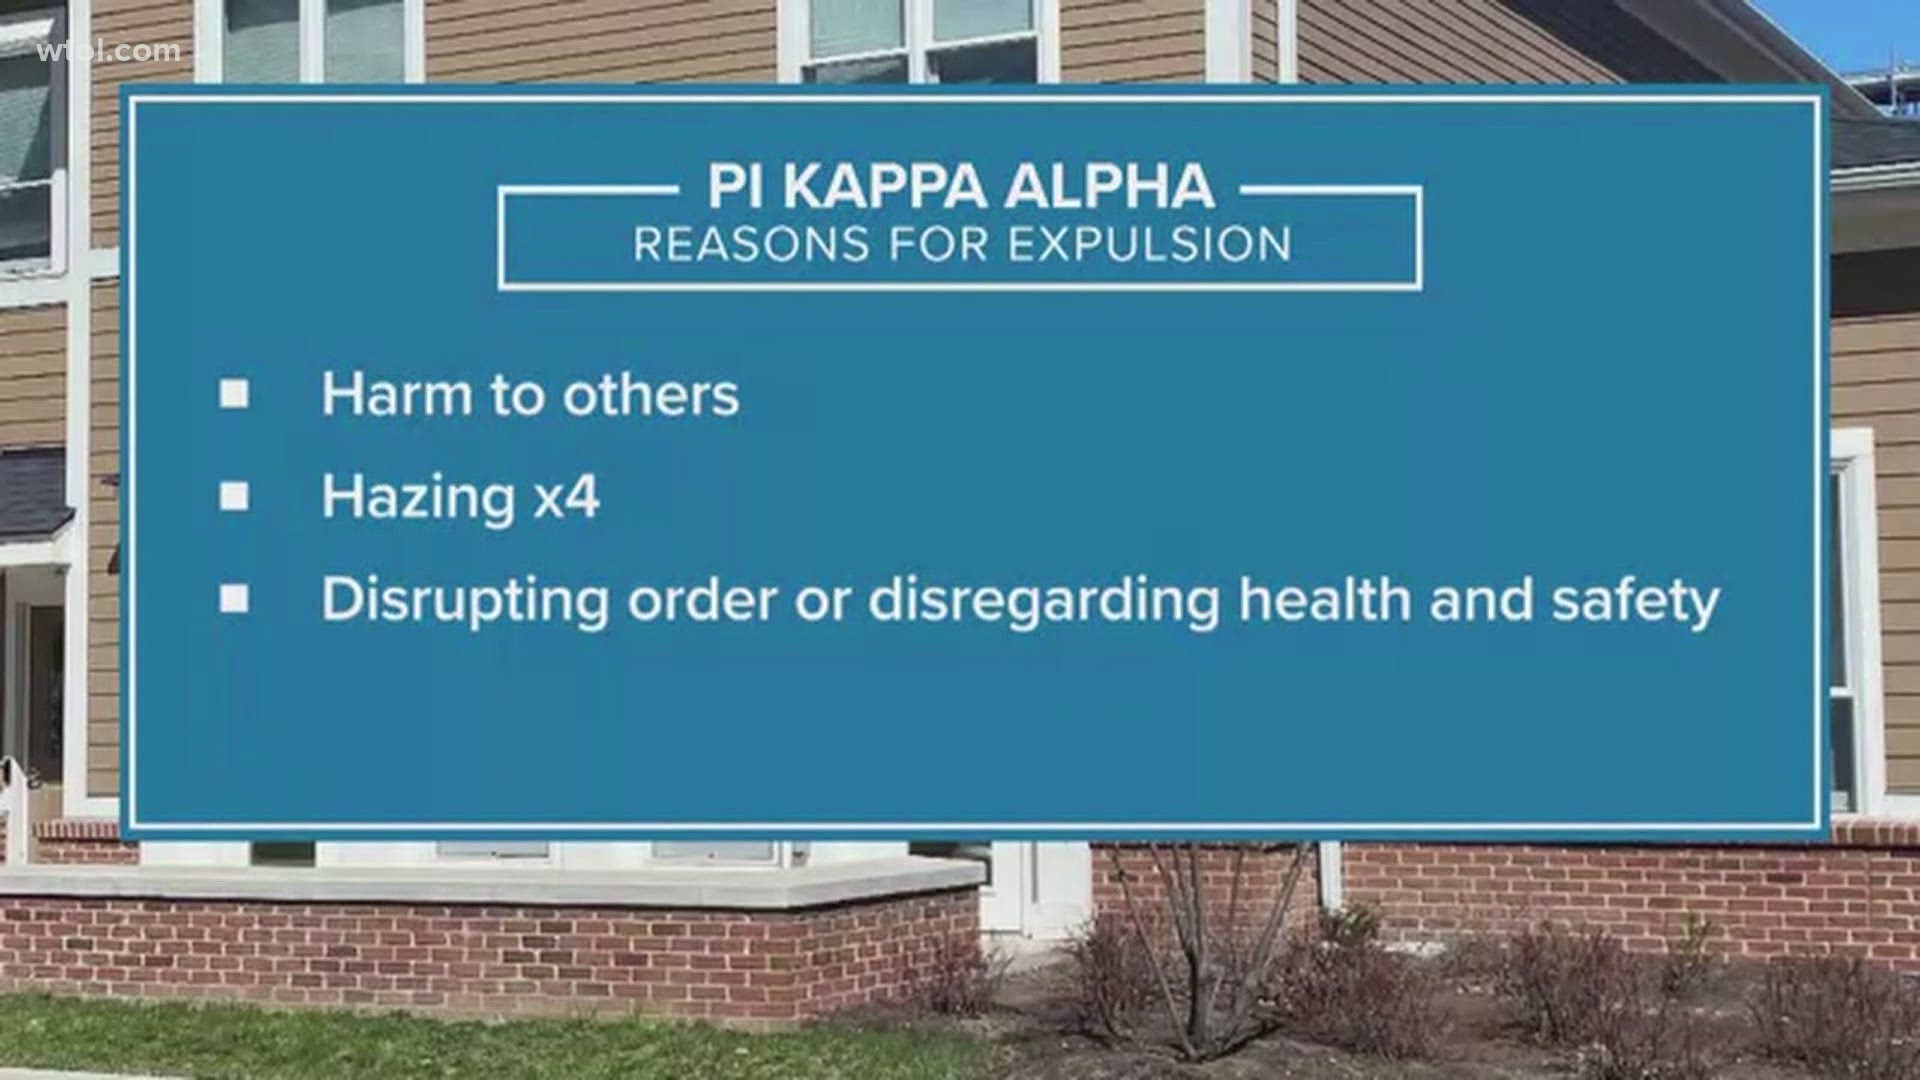 "This expulsion is because of hazing, which is absolutely intolerable," a BGSU spokesman said in a statement.